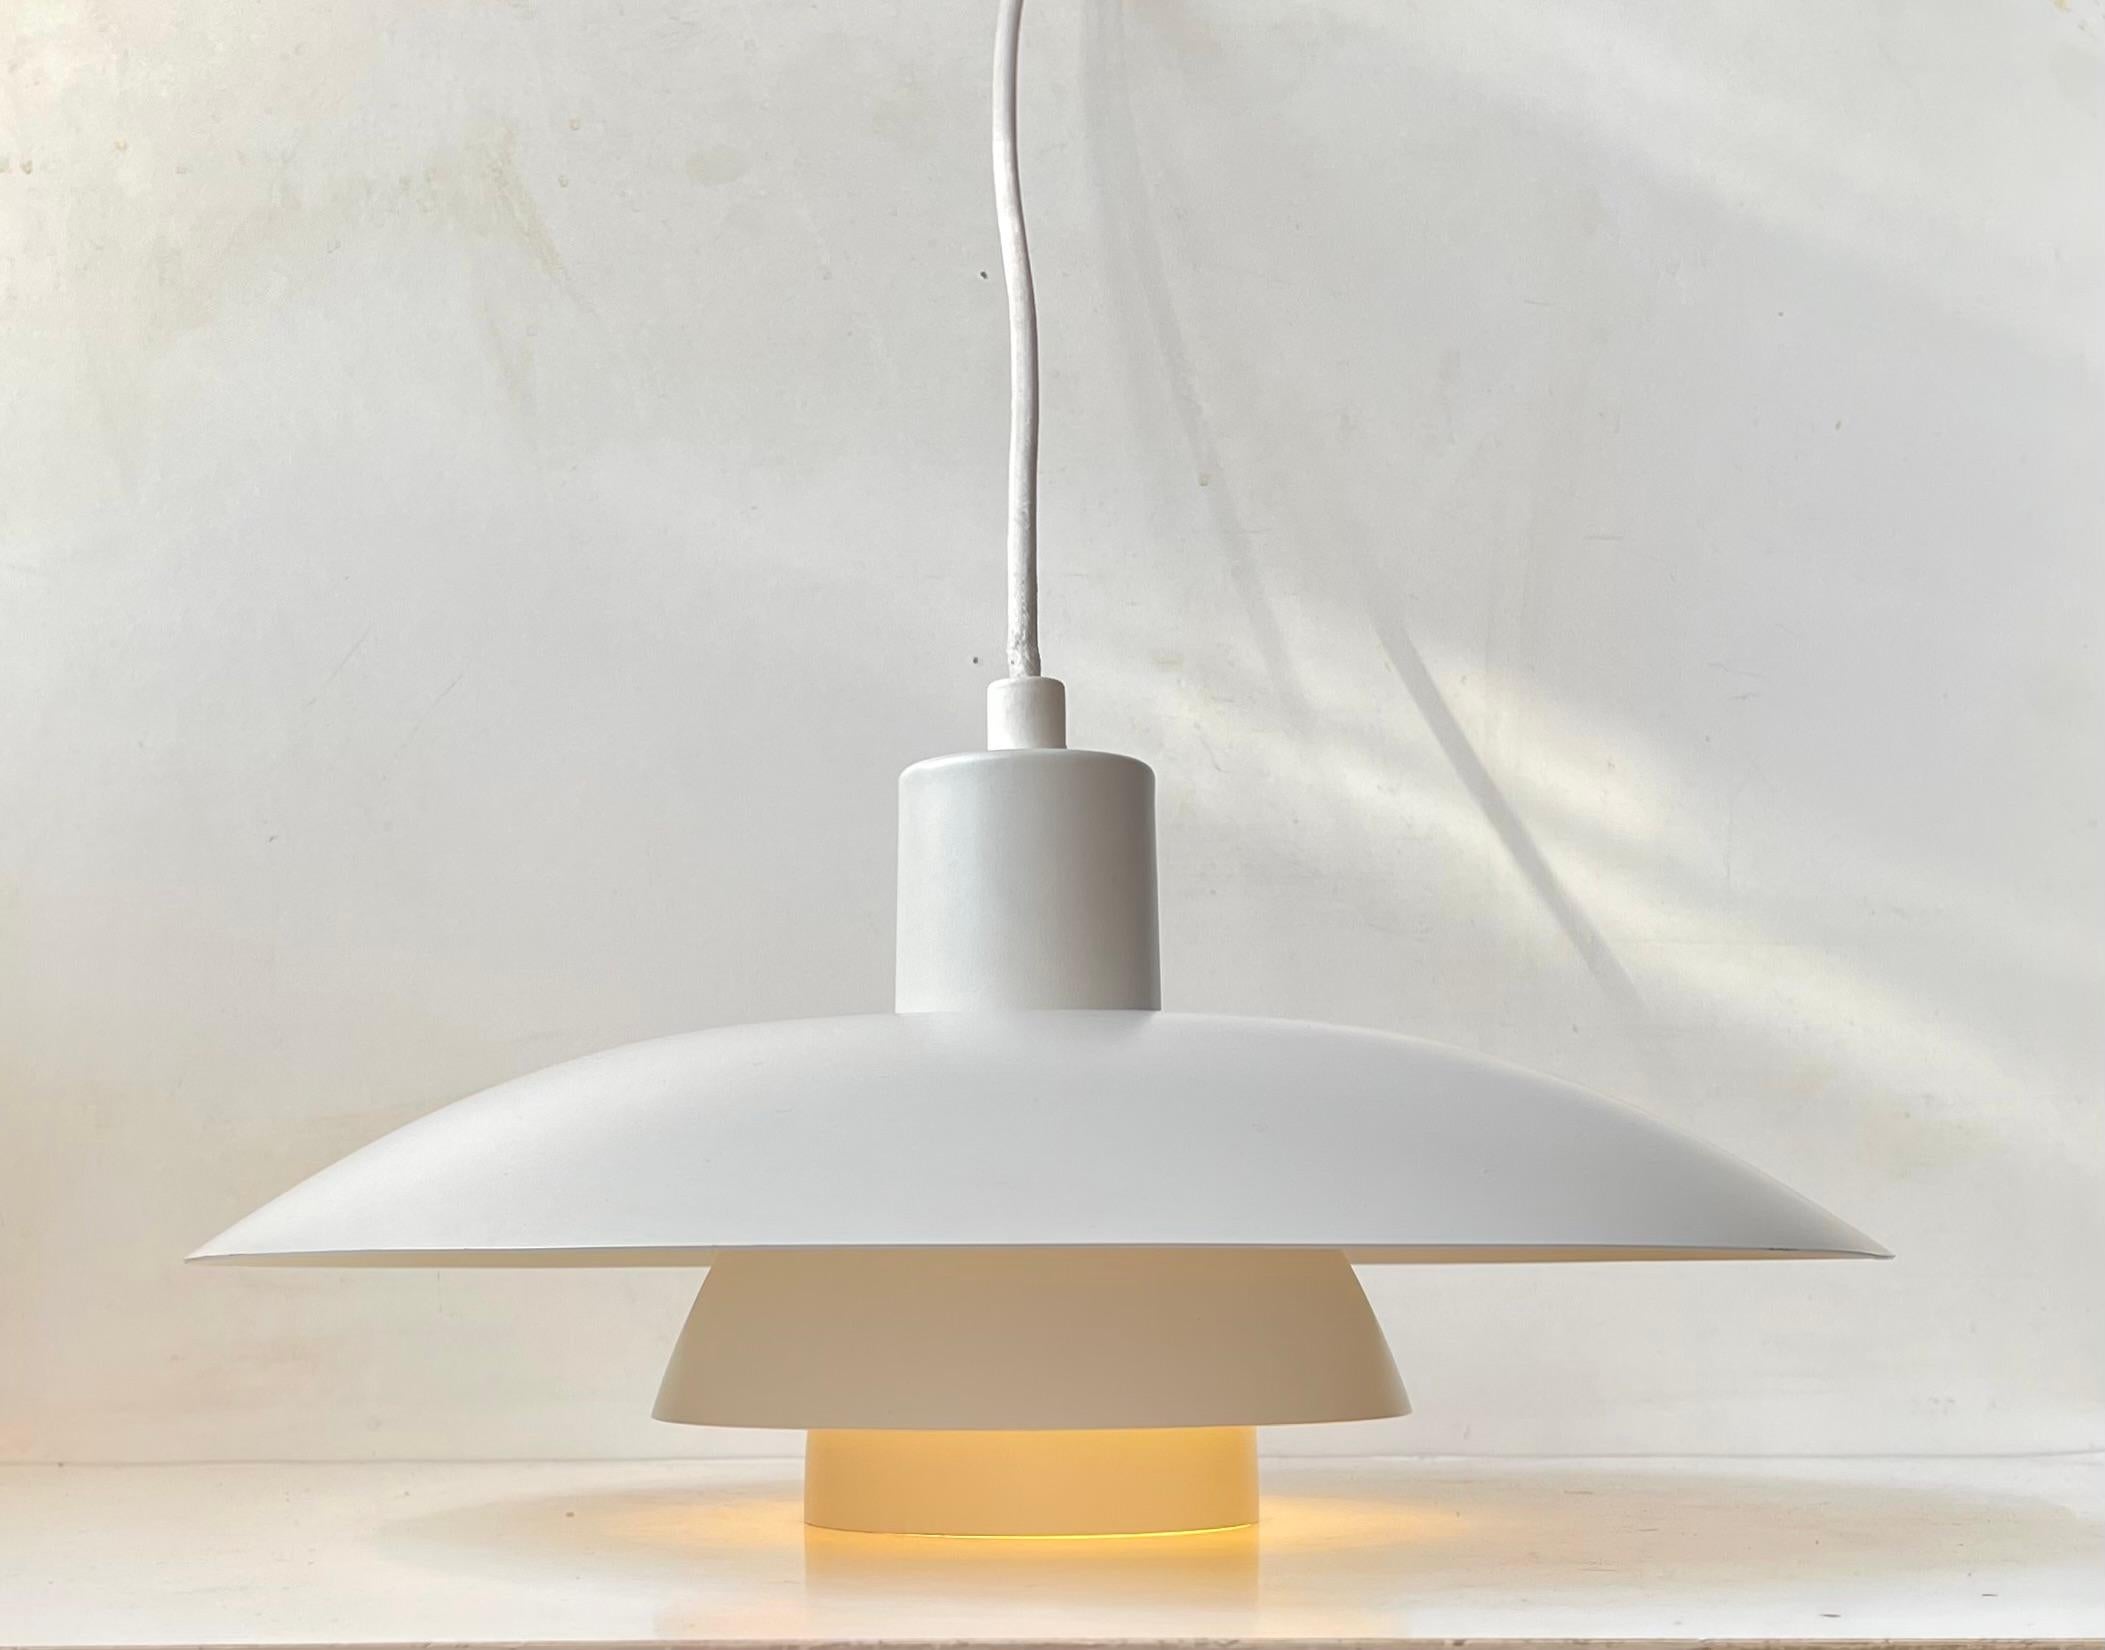 - Produced in Denmark circa 1980 
-Designed by Poul Henningsen - PH 
-Manufactured by Louis Poulsen 
-Measurements: Diameter: 40 cm, Height: 20 cm. 
- The lamp is designed so that you have a maximum diffusion of light and minimal glare.